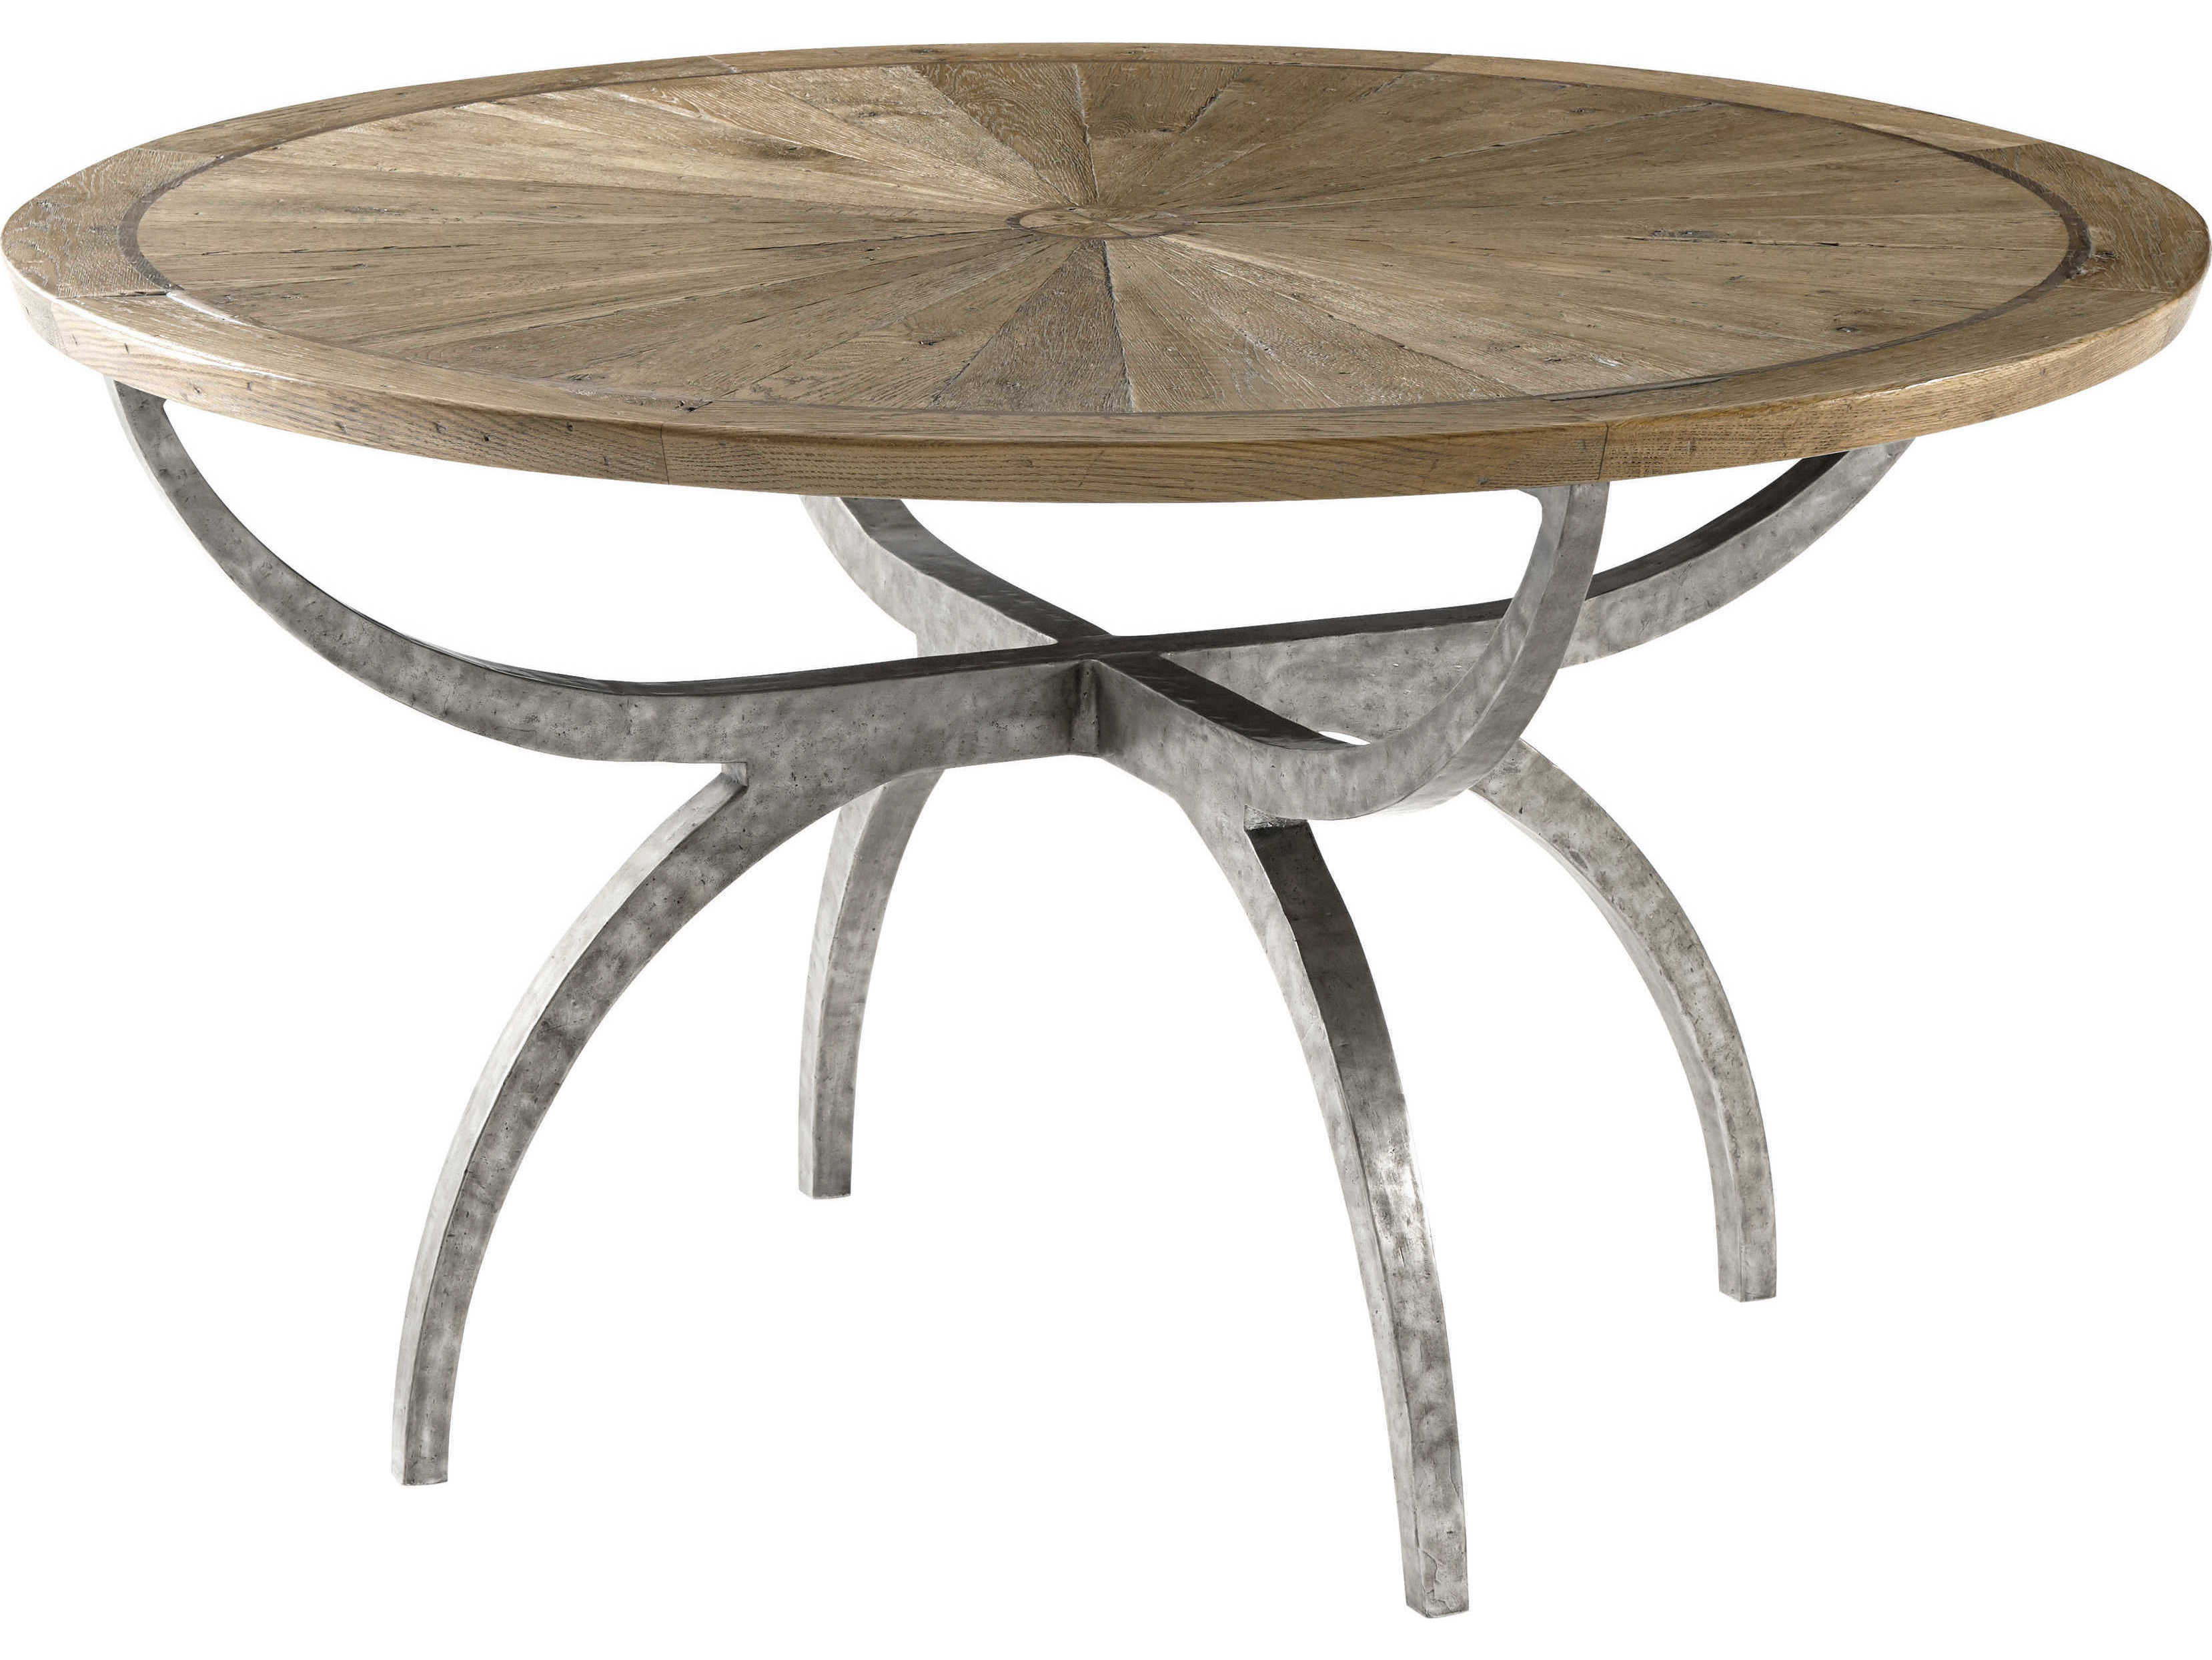 Theodore Alexander The Echoes Round Dining Table | TALCB54032C062